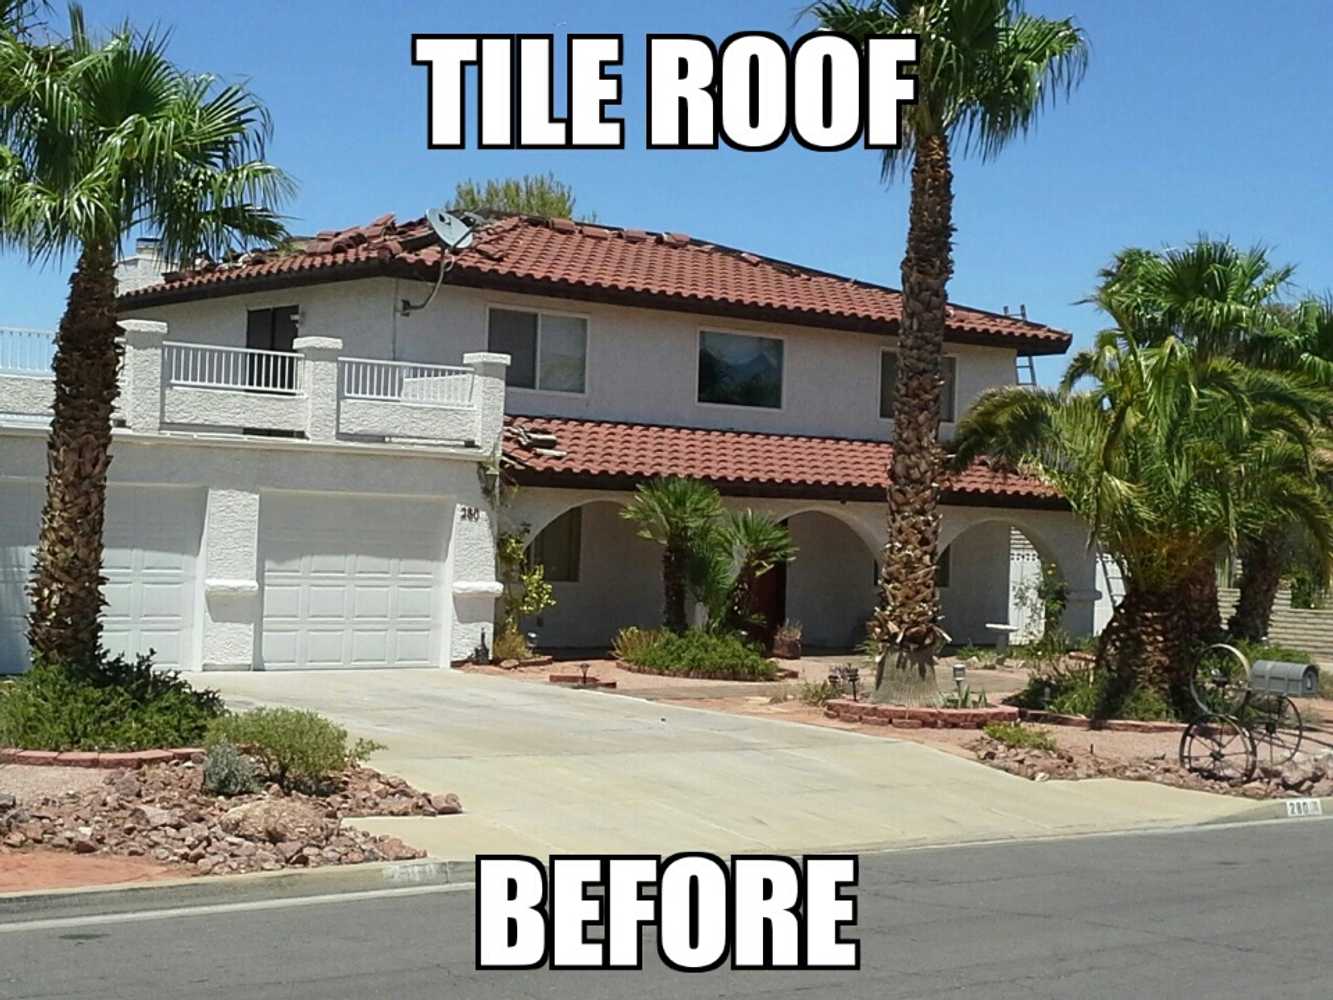 Before & After Tile Reroof